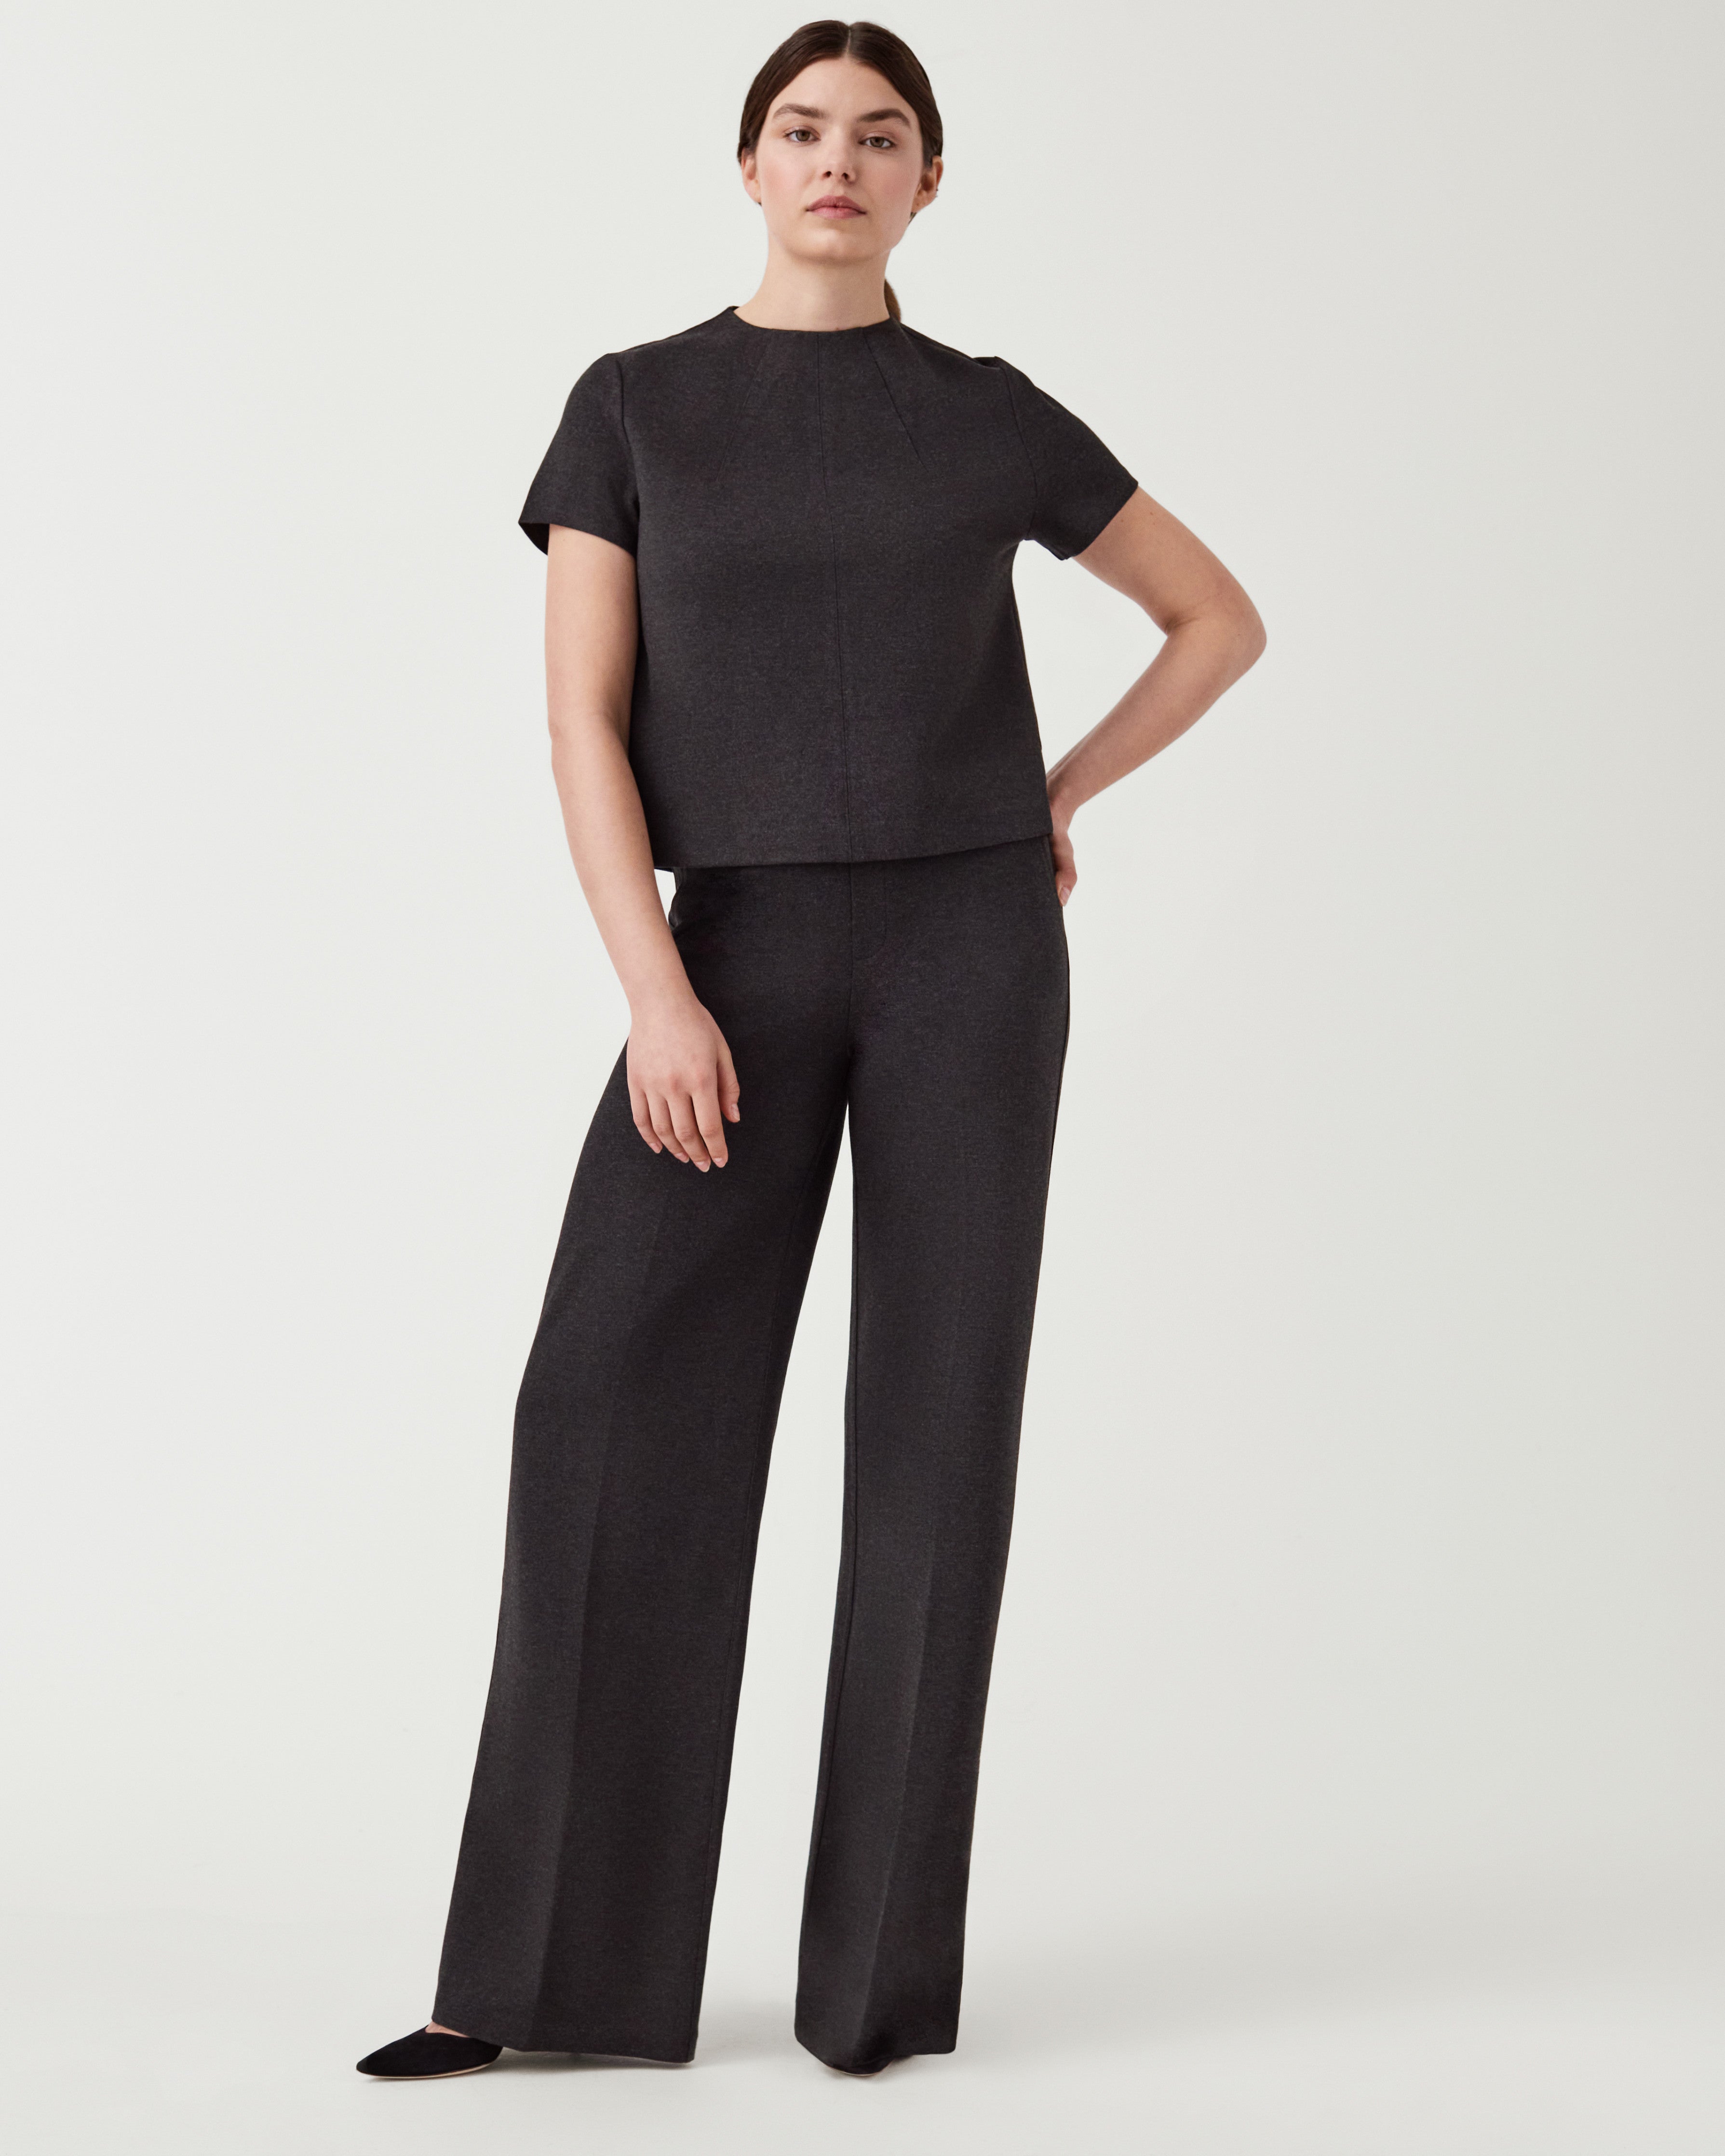 Slim Trouser Pants In Plus Size In Ponte Knit - Charcoal Heathered